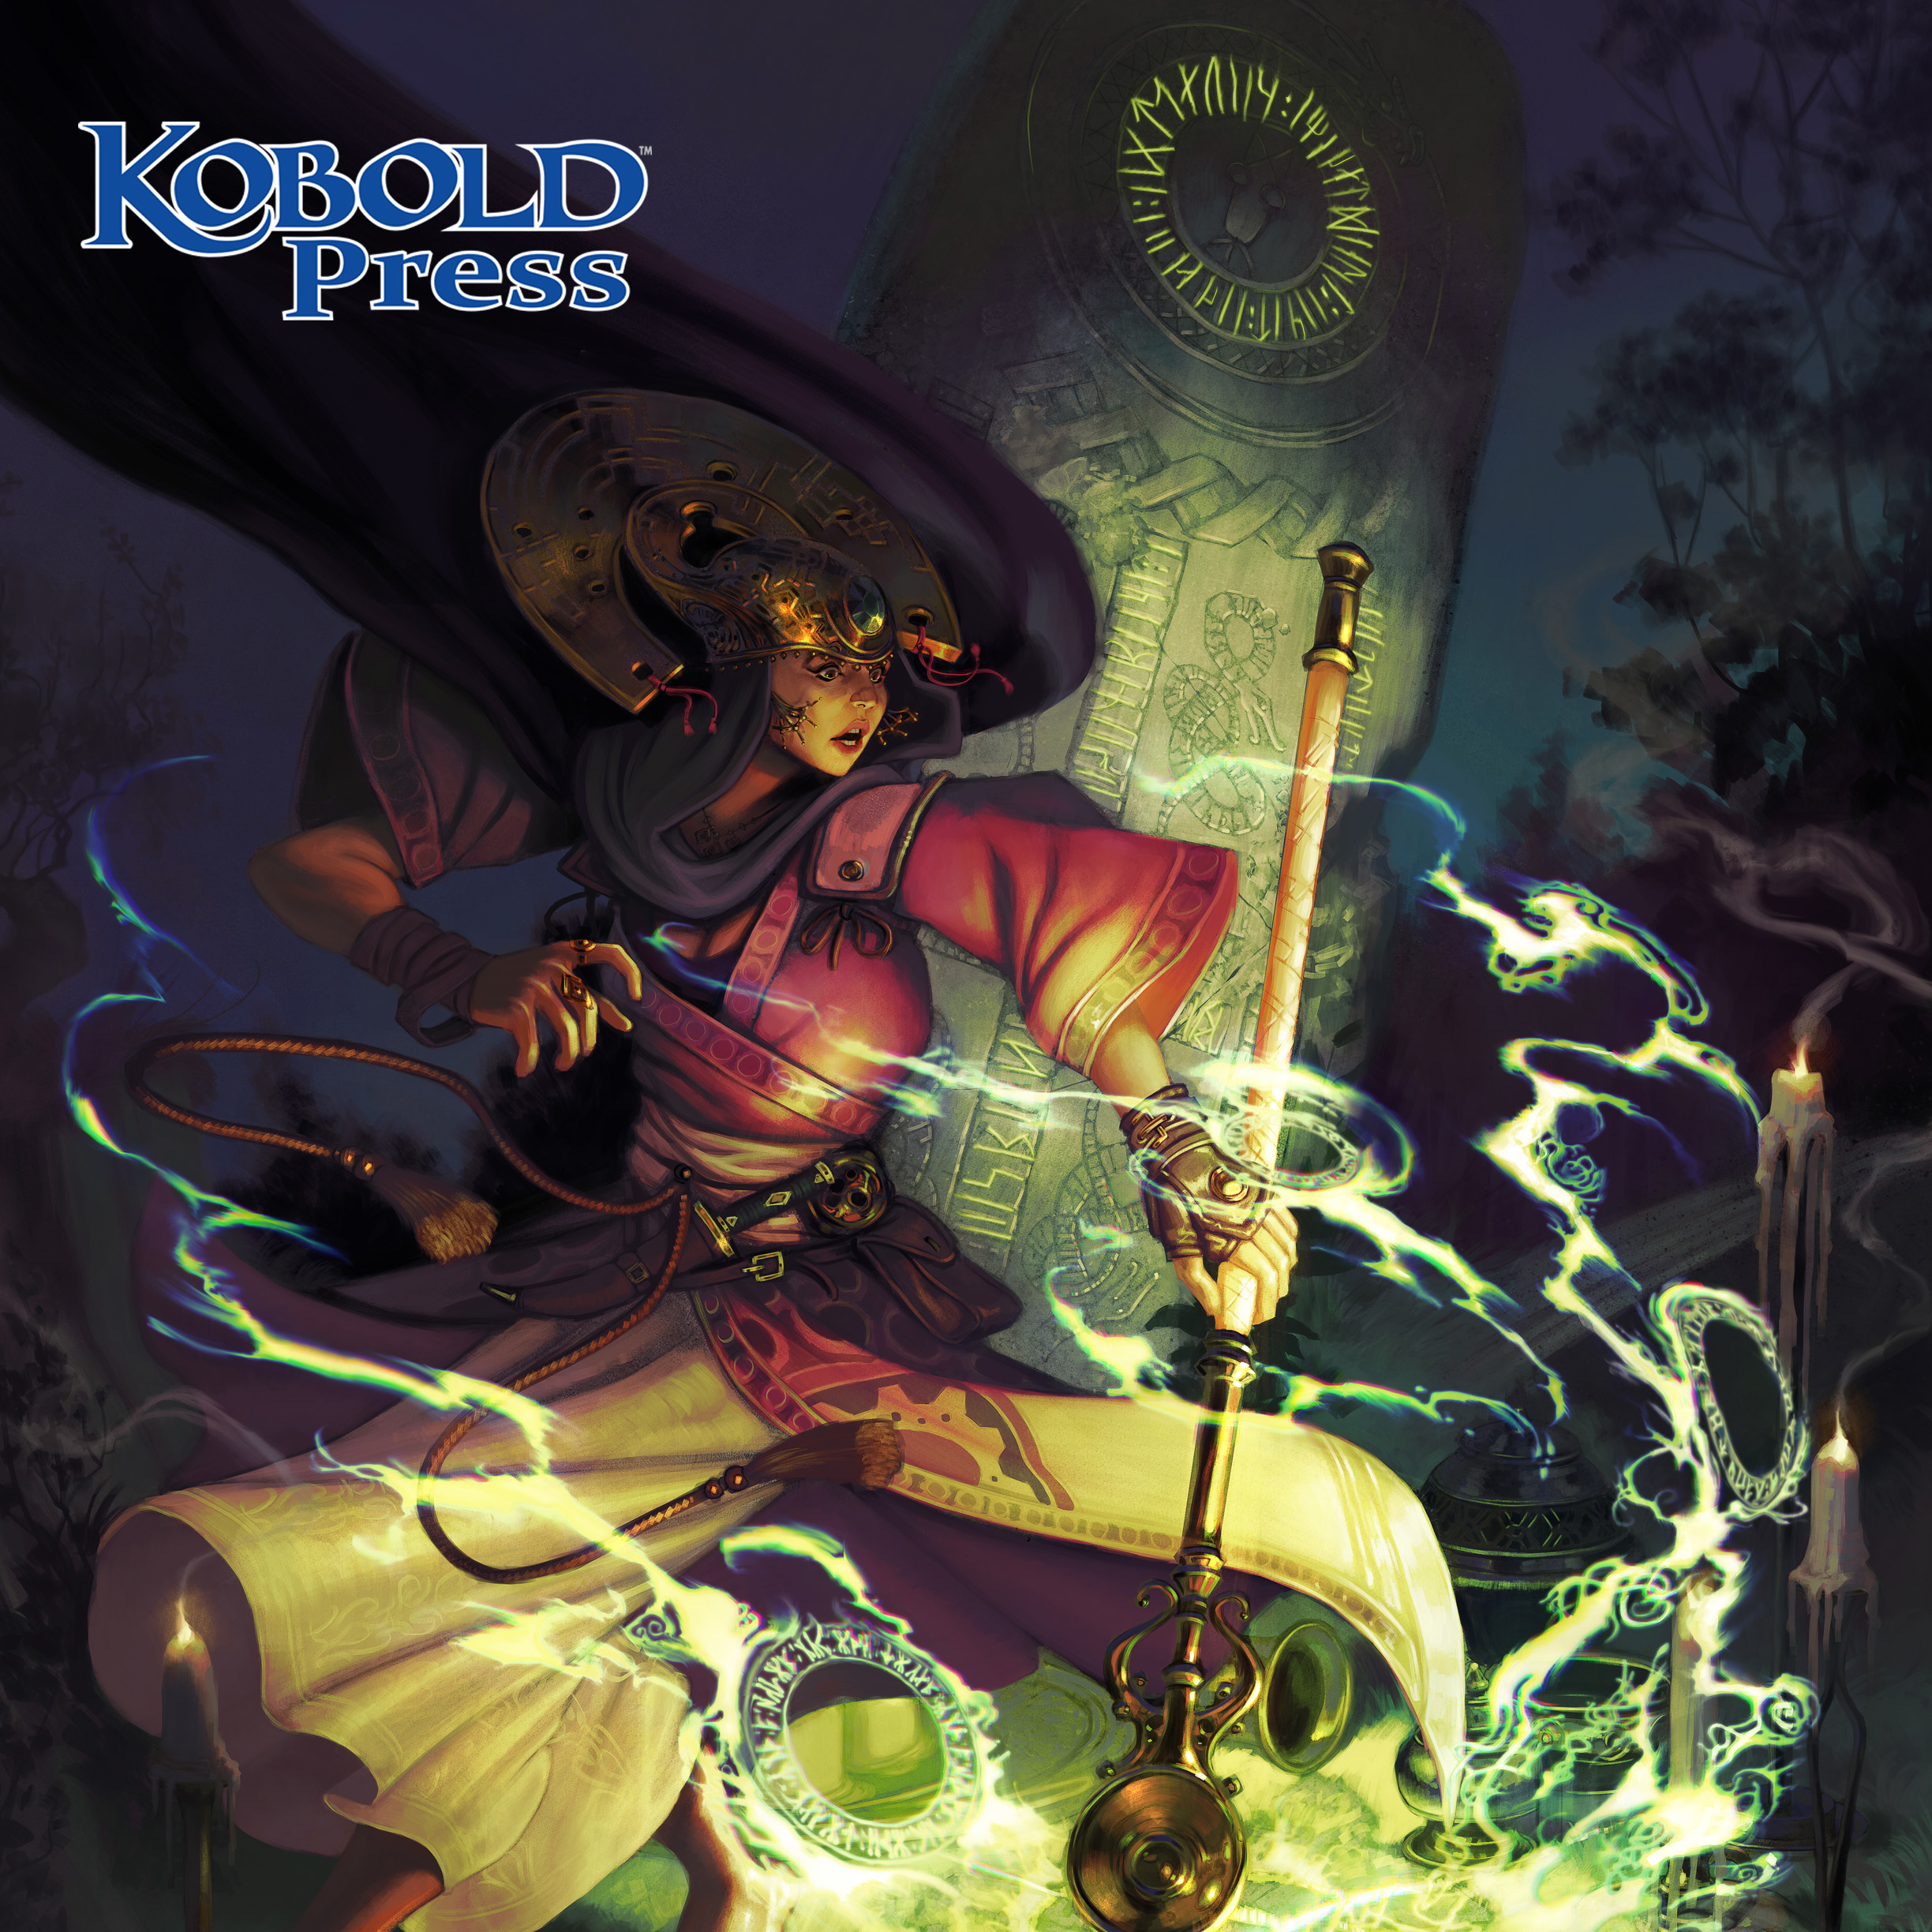 Wallpapers Archives - Kobold Press